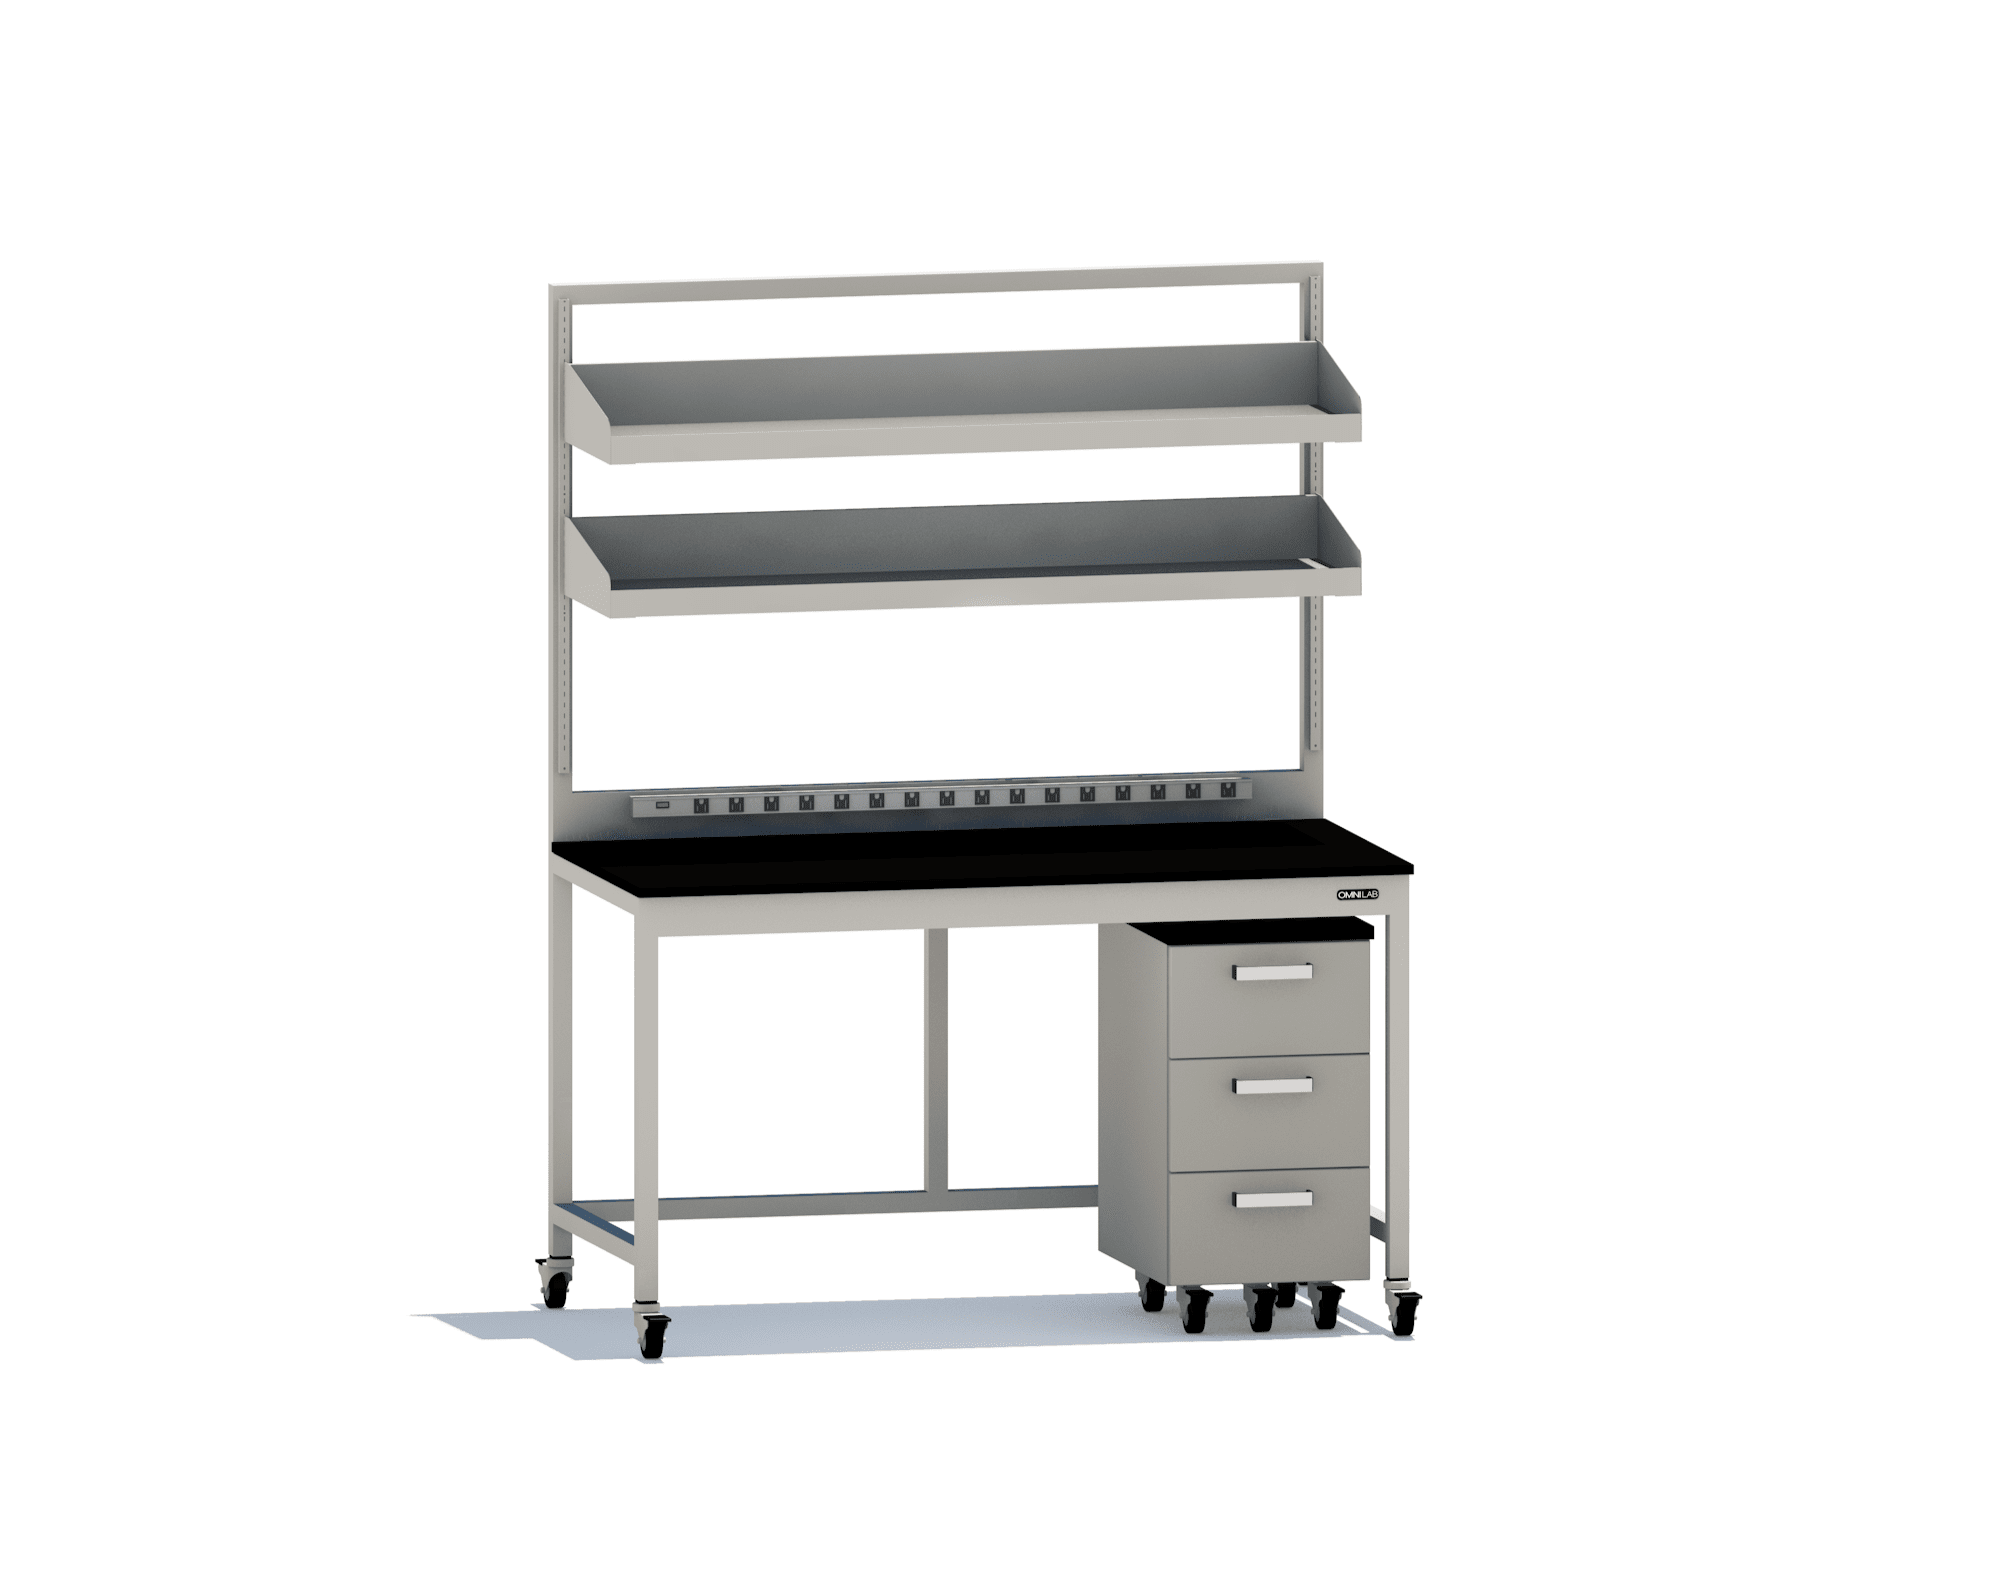 Complete Lab Table 3 - mobile Lab Tables OMNI Lab Solutions 60" wide Mobile 